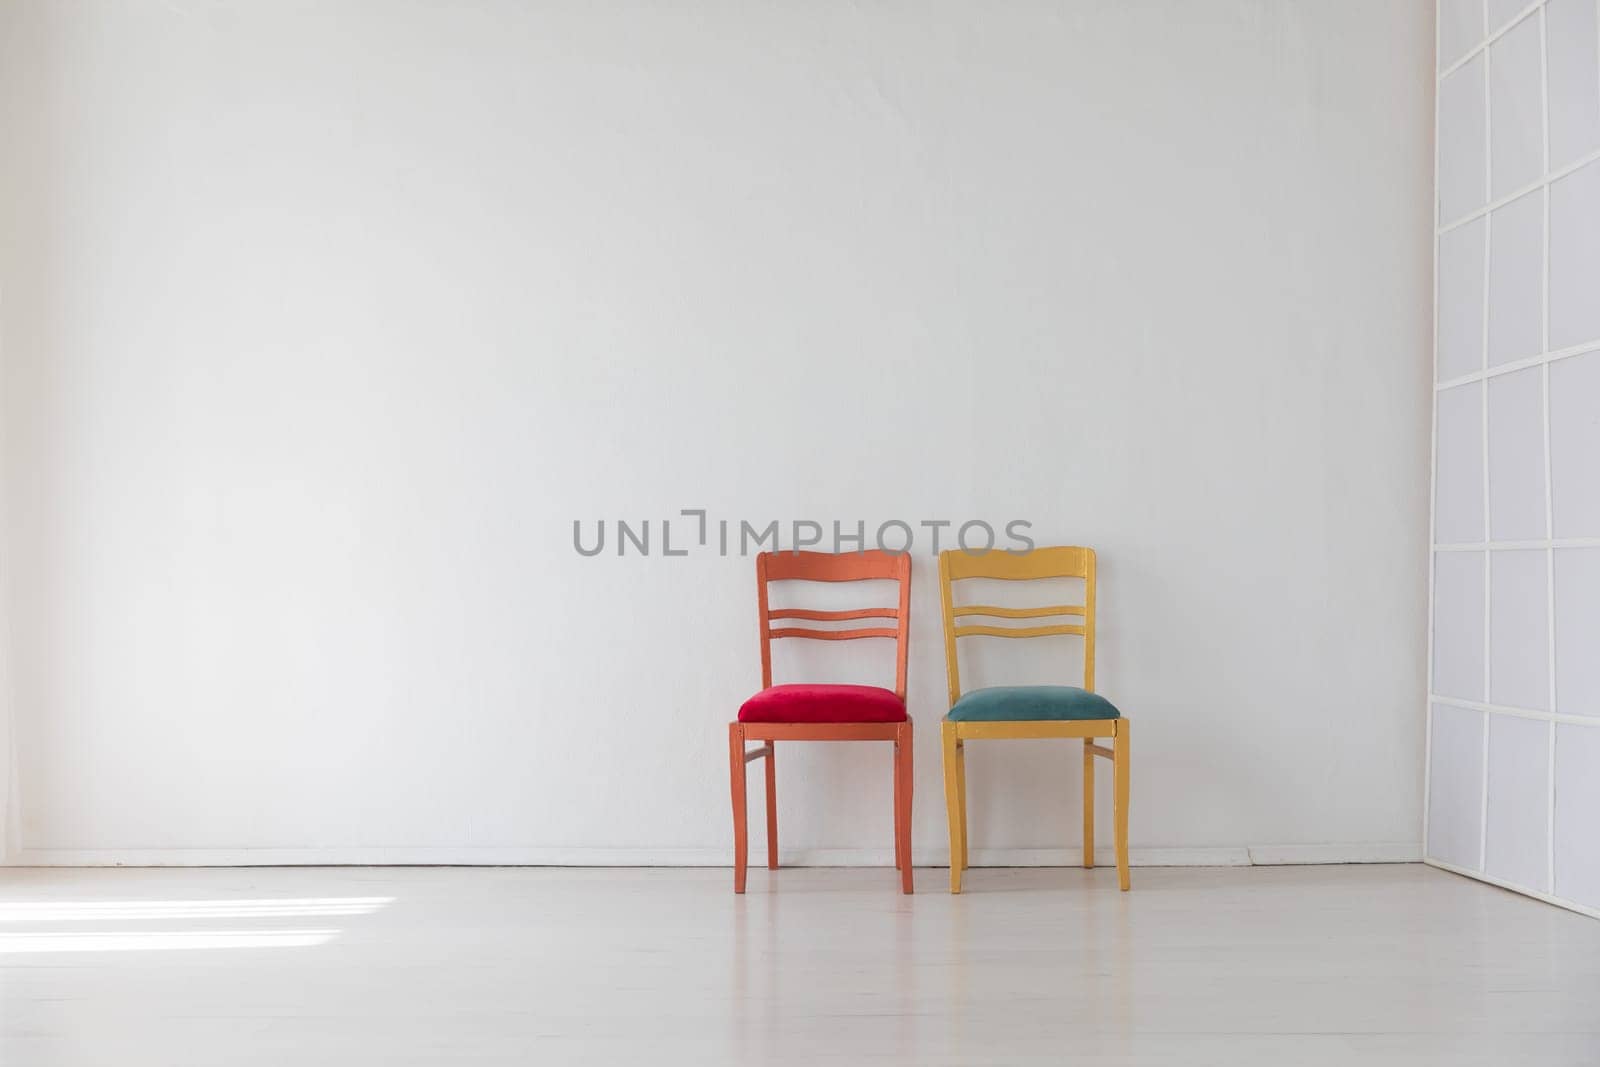 Two vintage chairs in the interior of a white room by Simakov